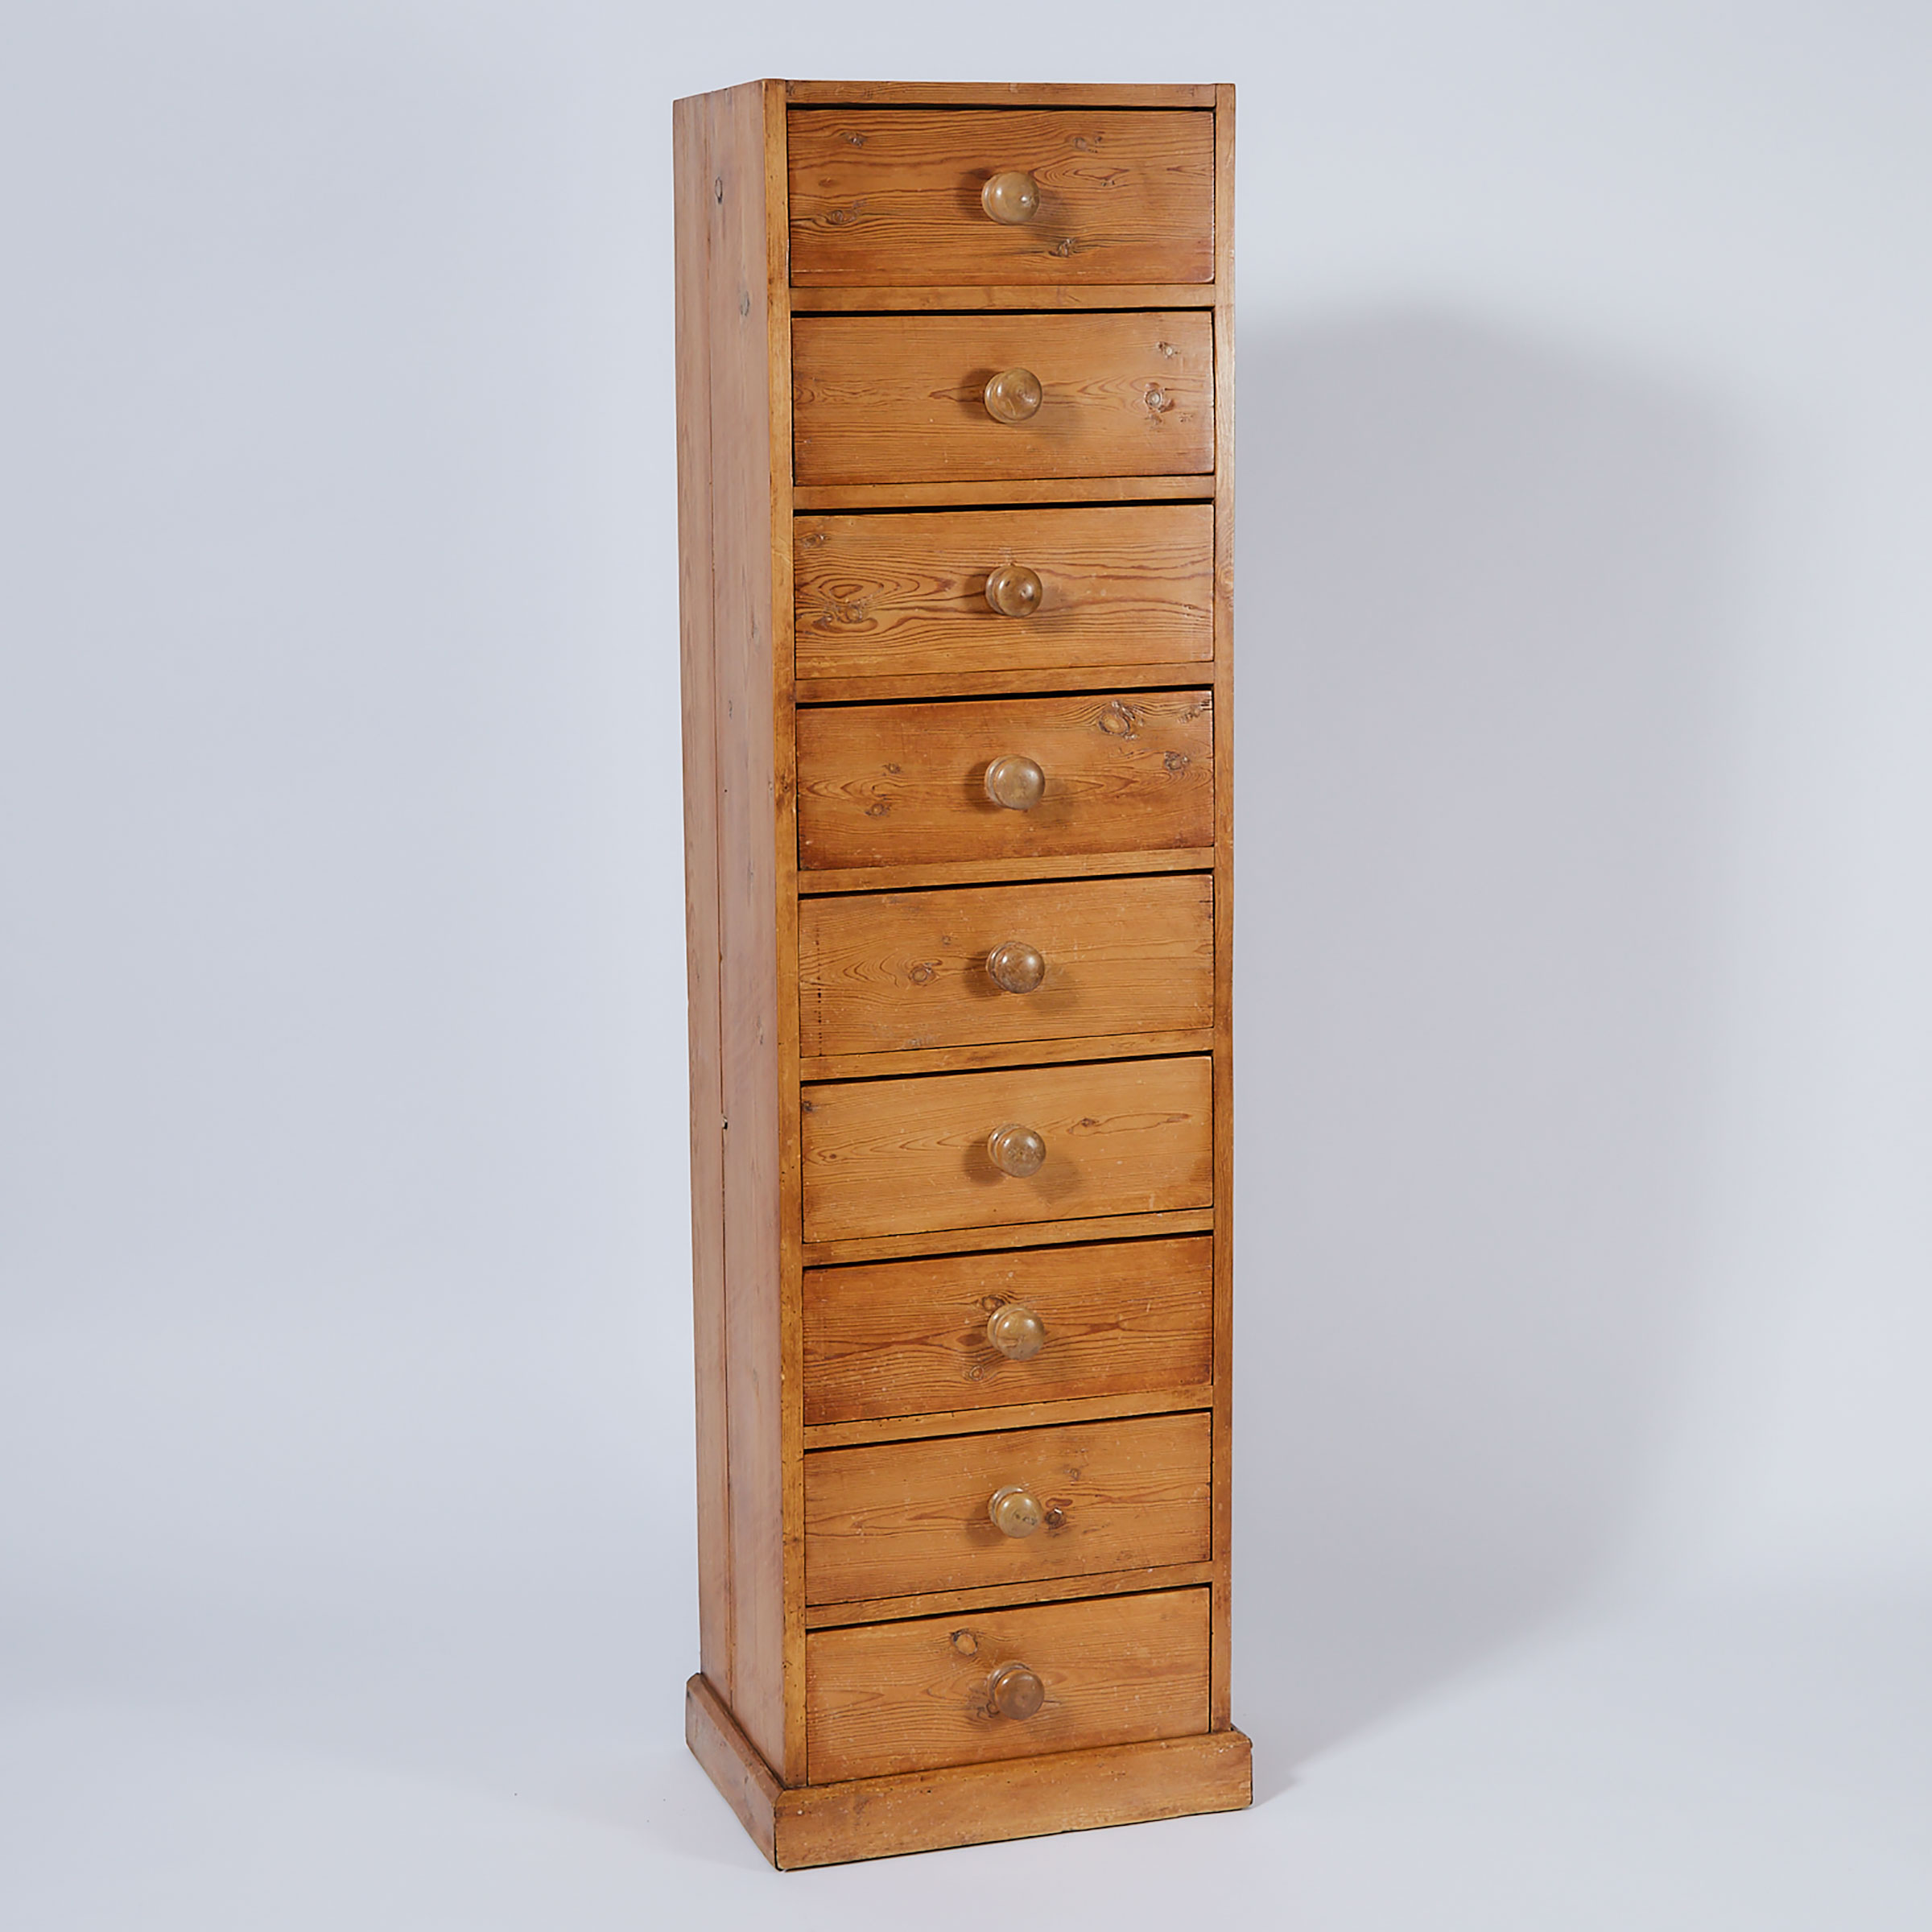 Provincial Pine Lingerie Chest of Drawers, 19th century